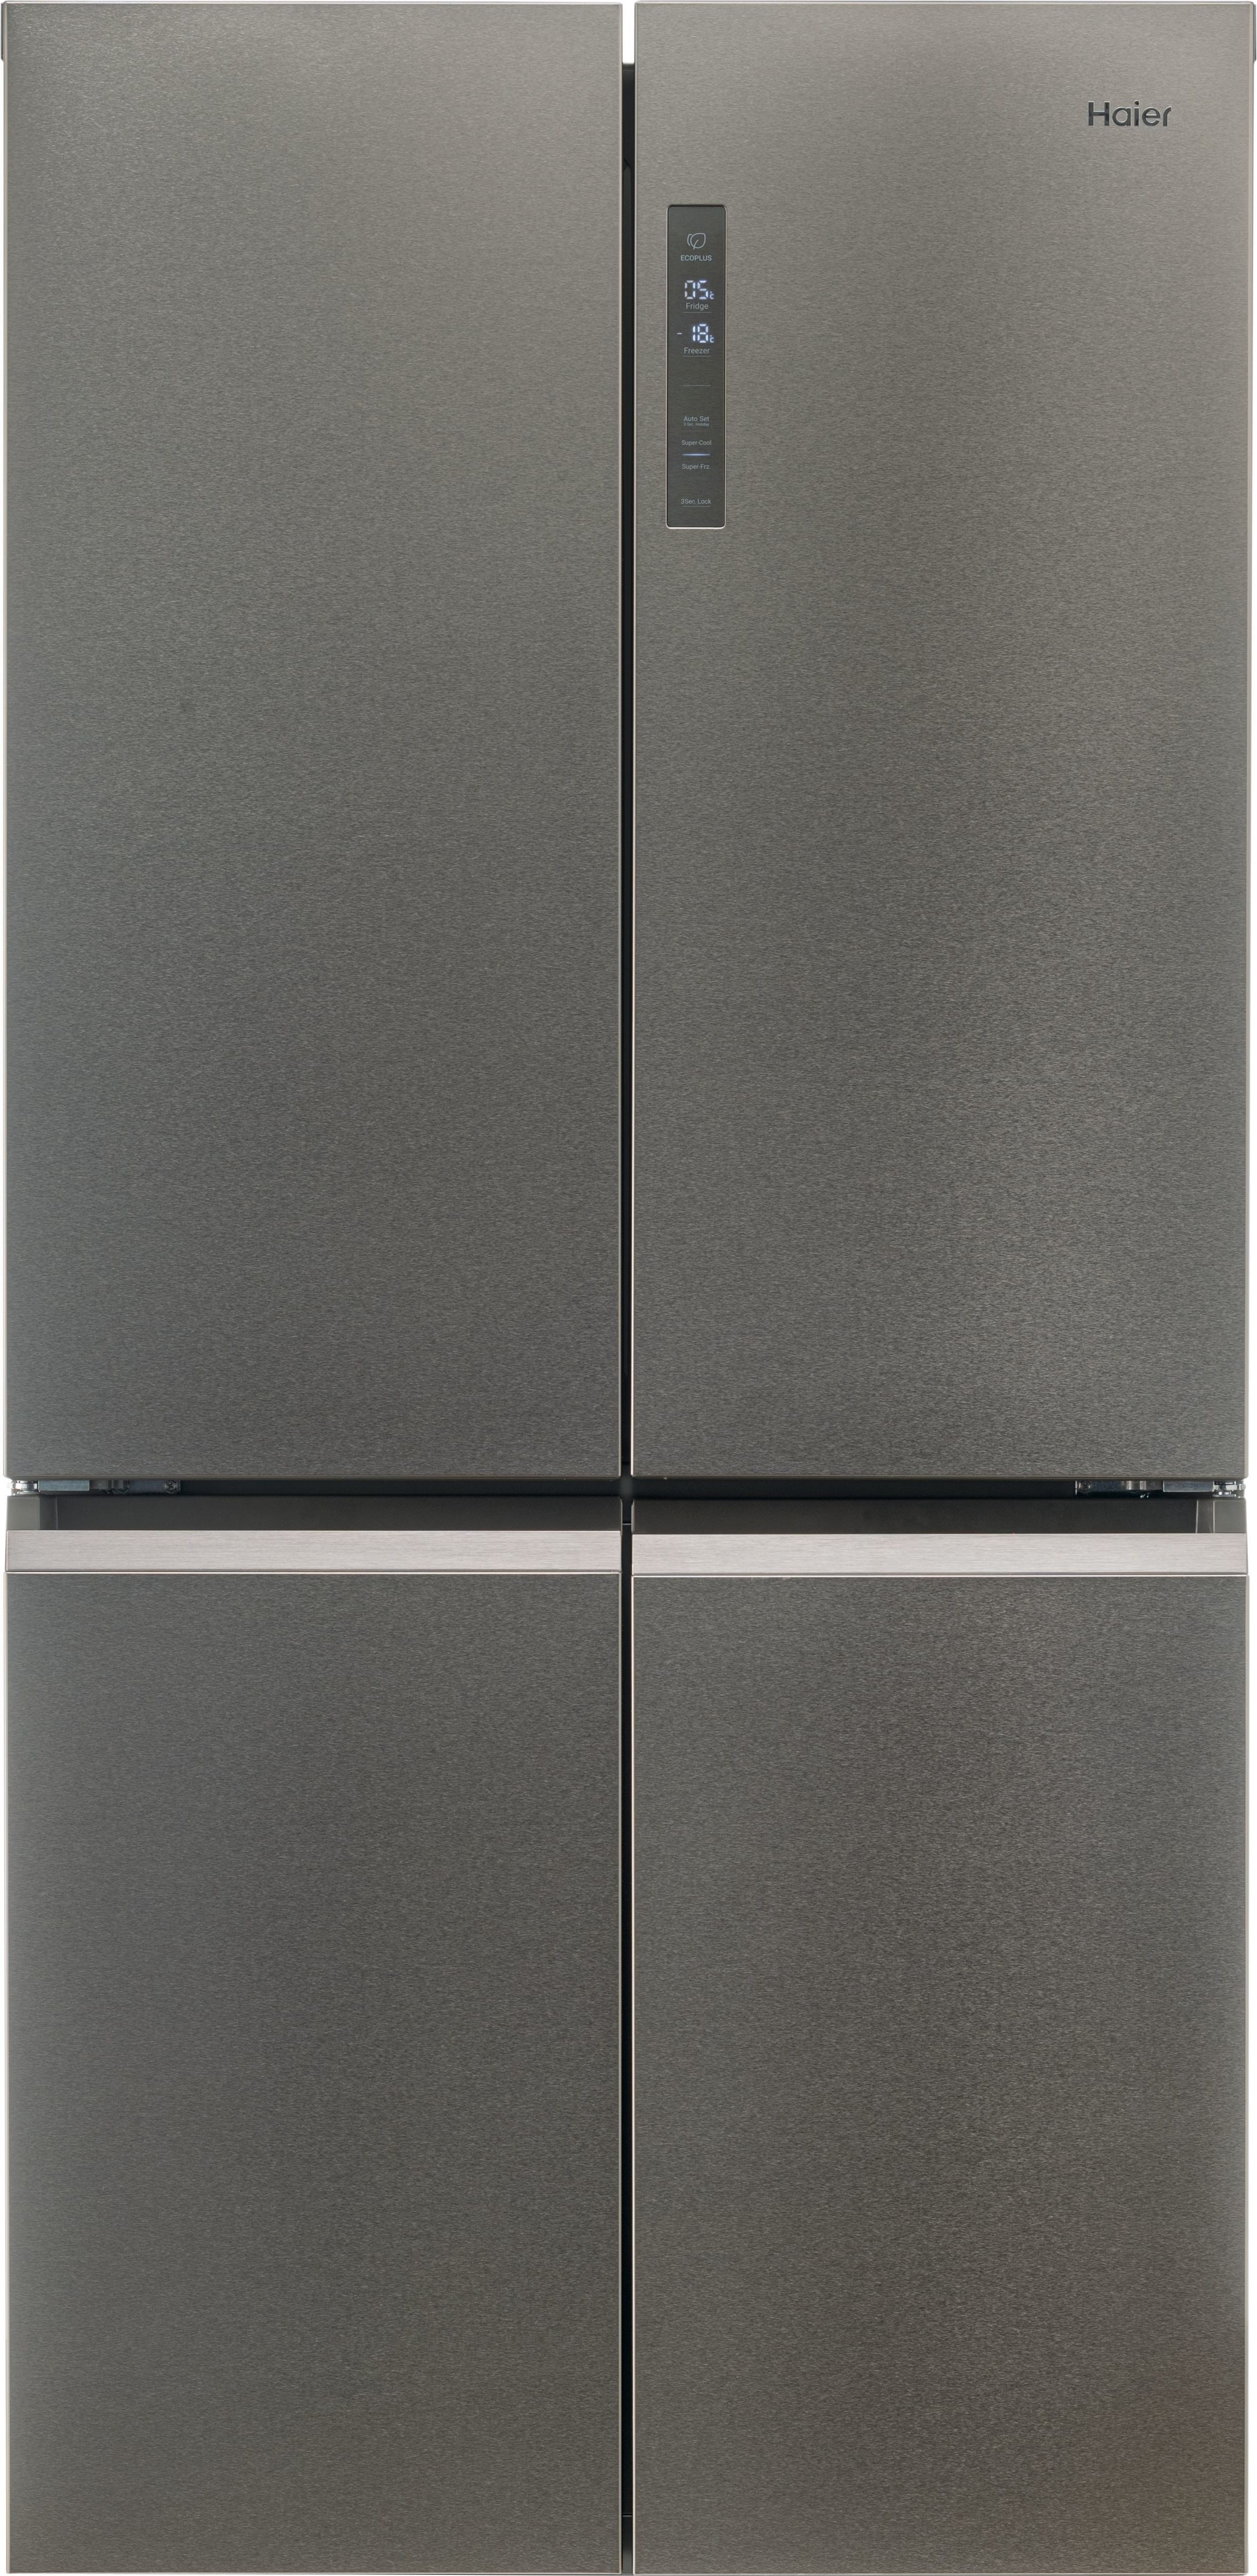 Haier Cube 90 Series 5 HCR59F19ENMM Total No Frost American Fridge Freezer - Silver - E Rated, Silver